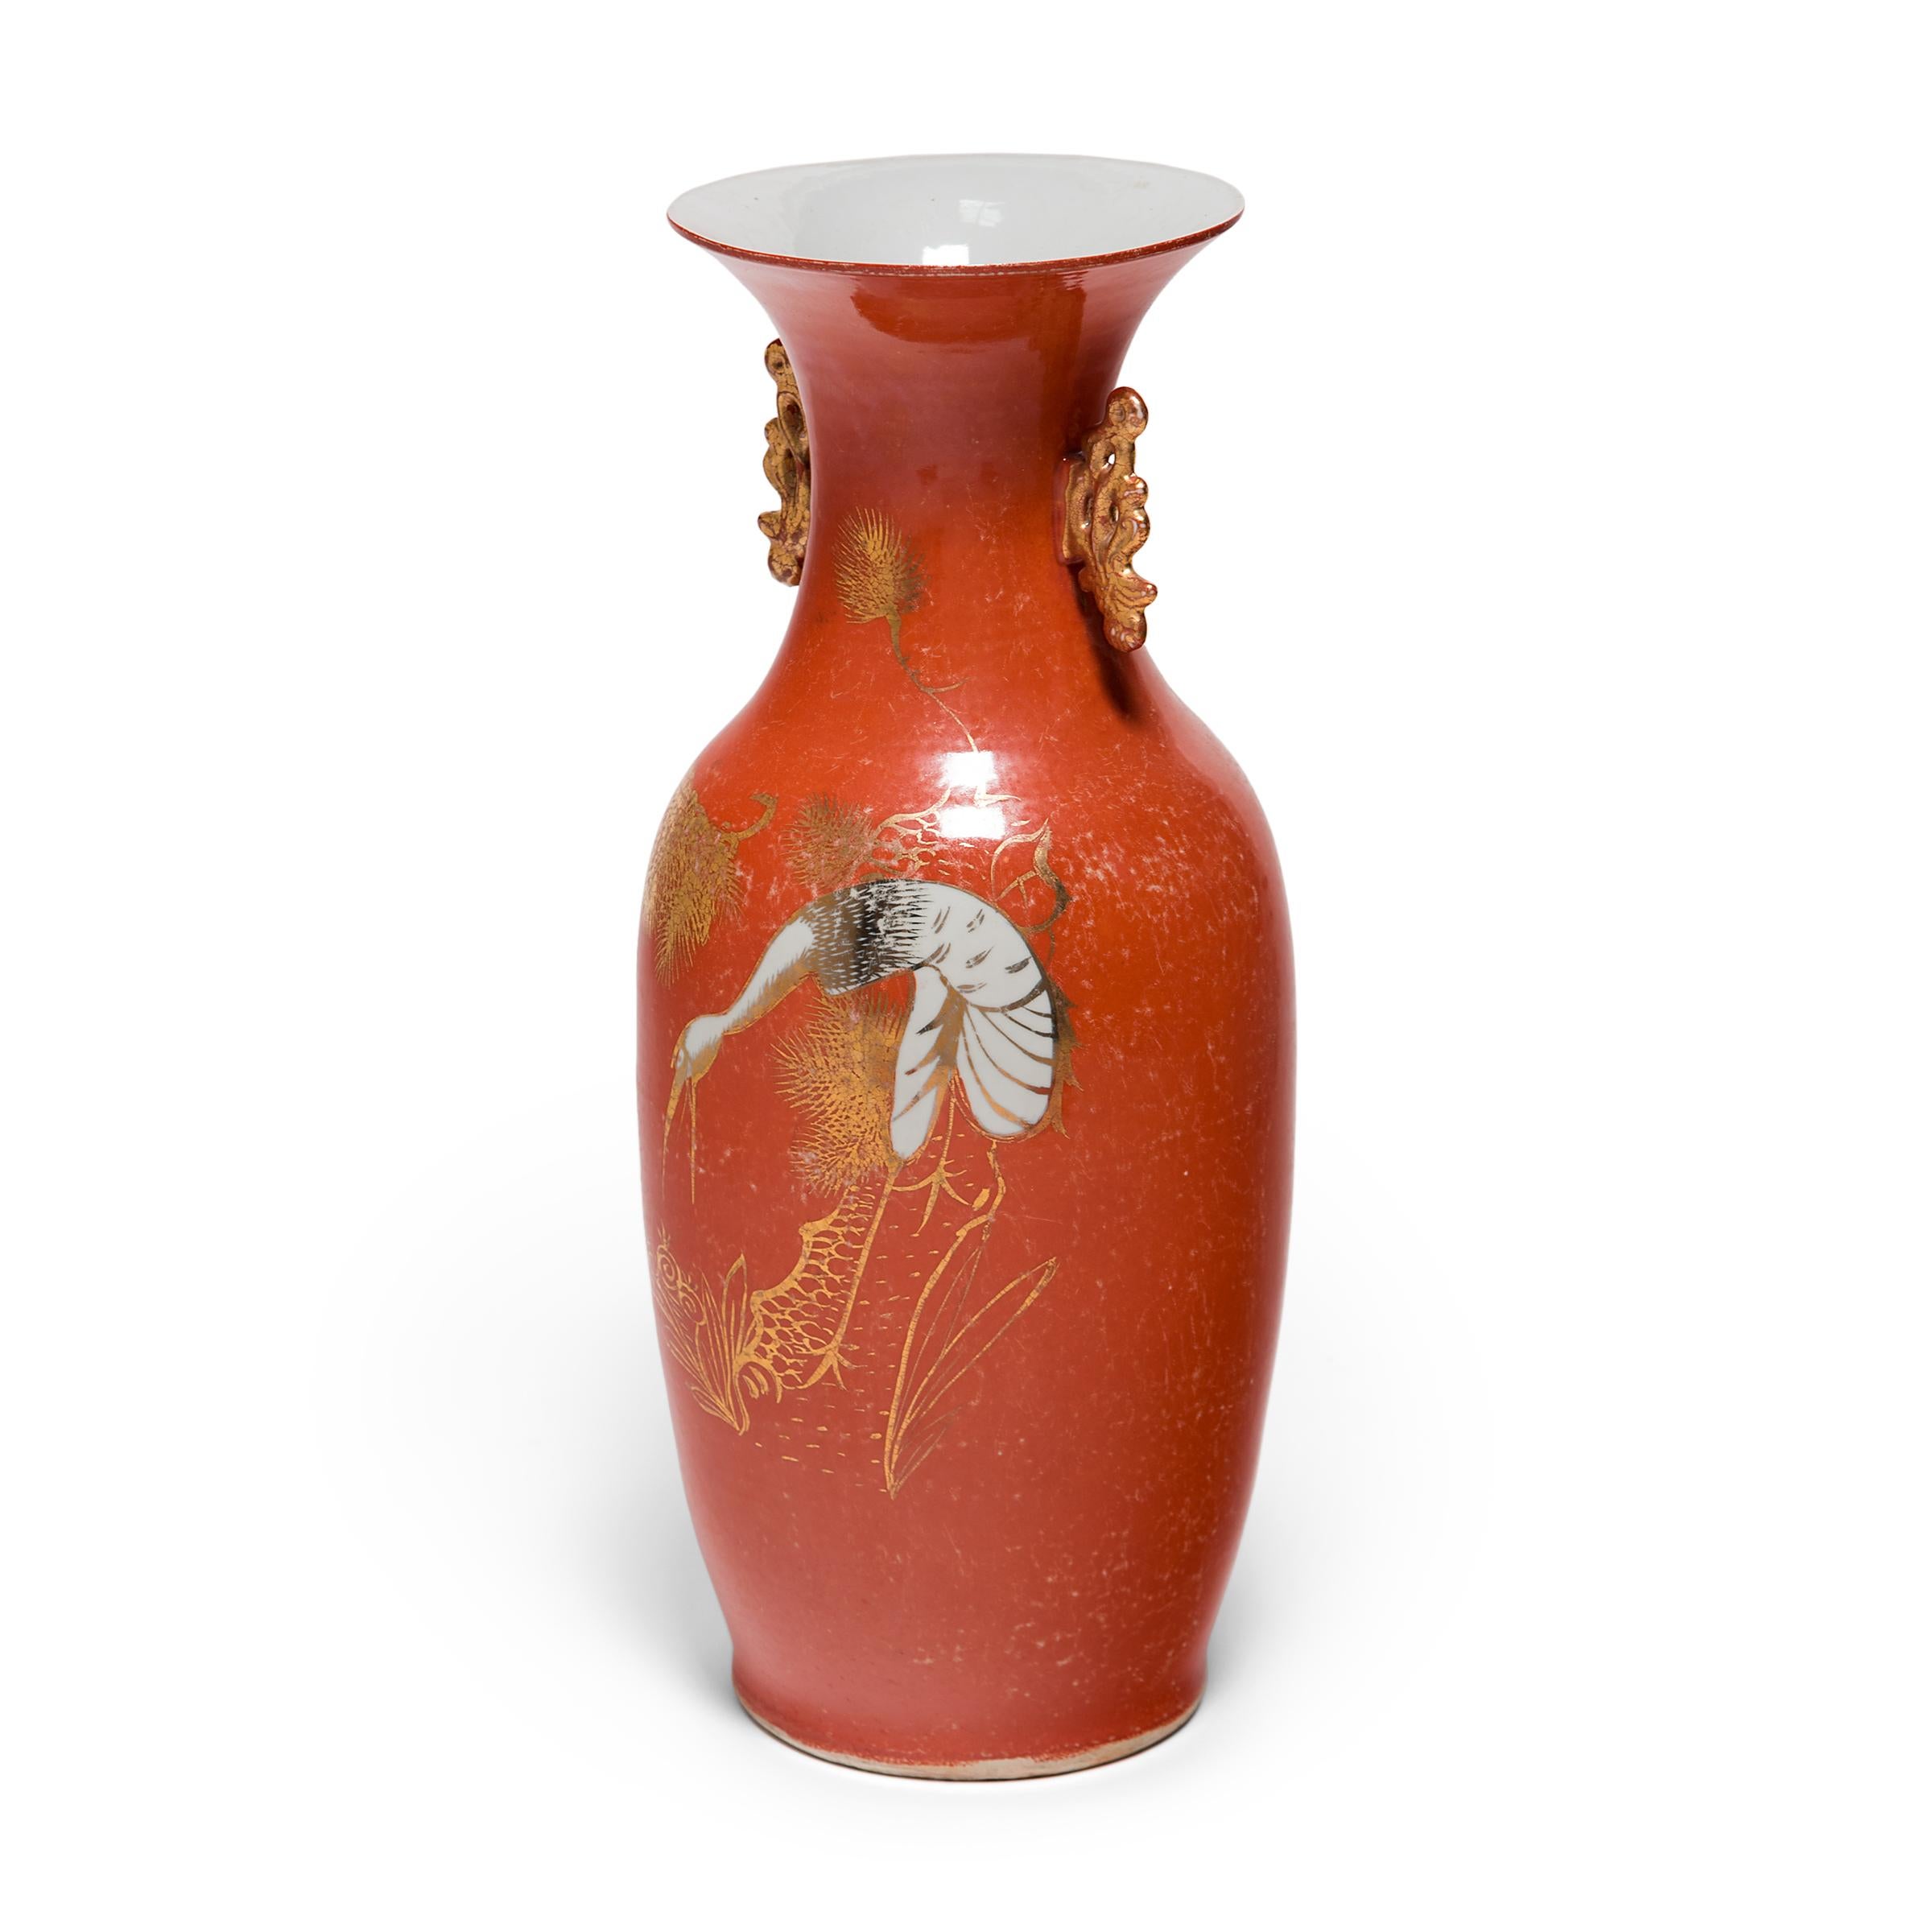 Drawing on the enduring phoenix tail form that dates to China’s Bronze Age, this porcelain vase from the 1920s exhibits the sinuous lines and gilded refinement that helped to define the Art Deco style of the early 20th century. Glazed rich